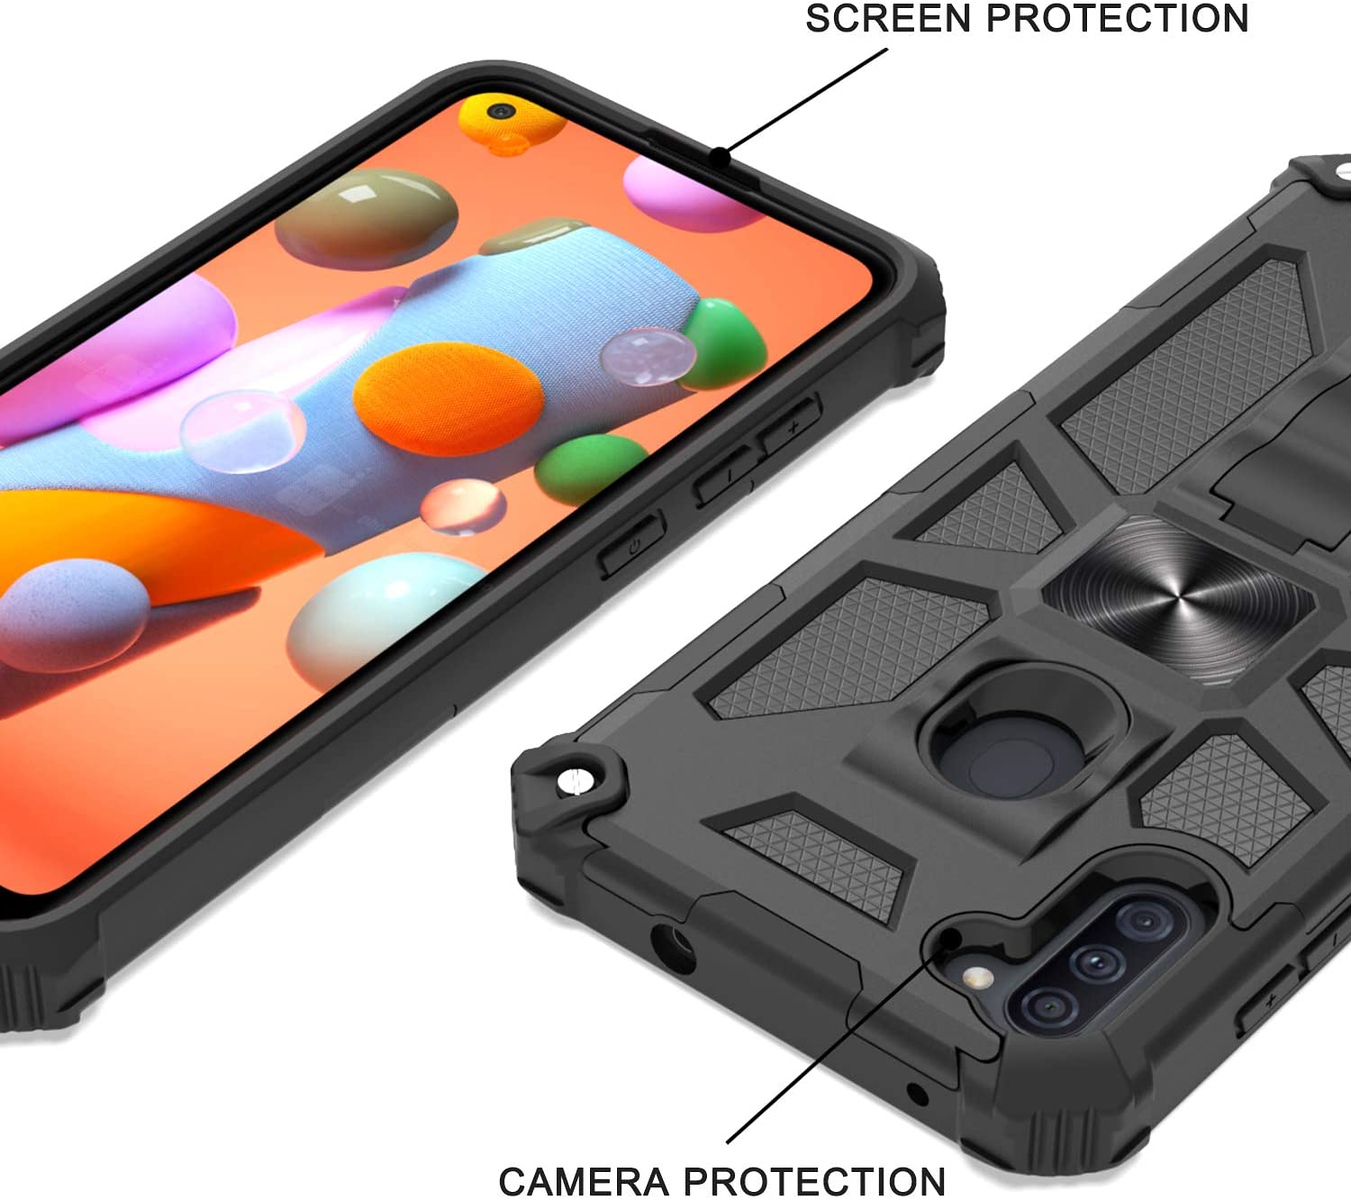 Xpression Case for Motorola Moto G Power 2021 with Invisible Kickstand Stand Dual Layer Hybrid Defender Military Grade Shockproof Hard TPU Phone Cover [Black] - image 5 of 8